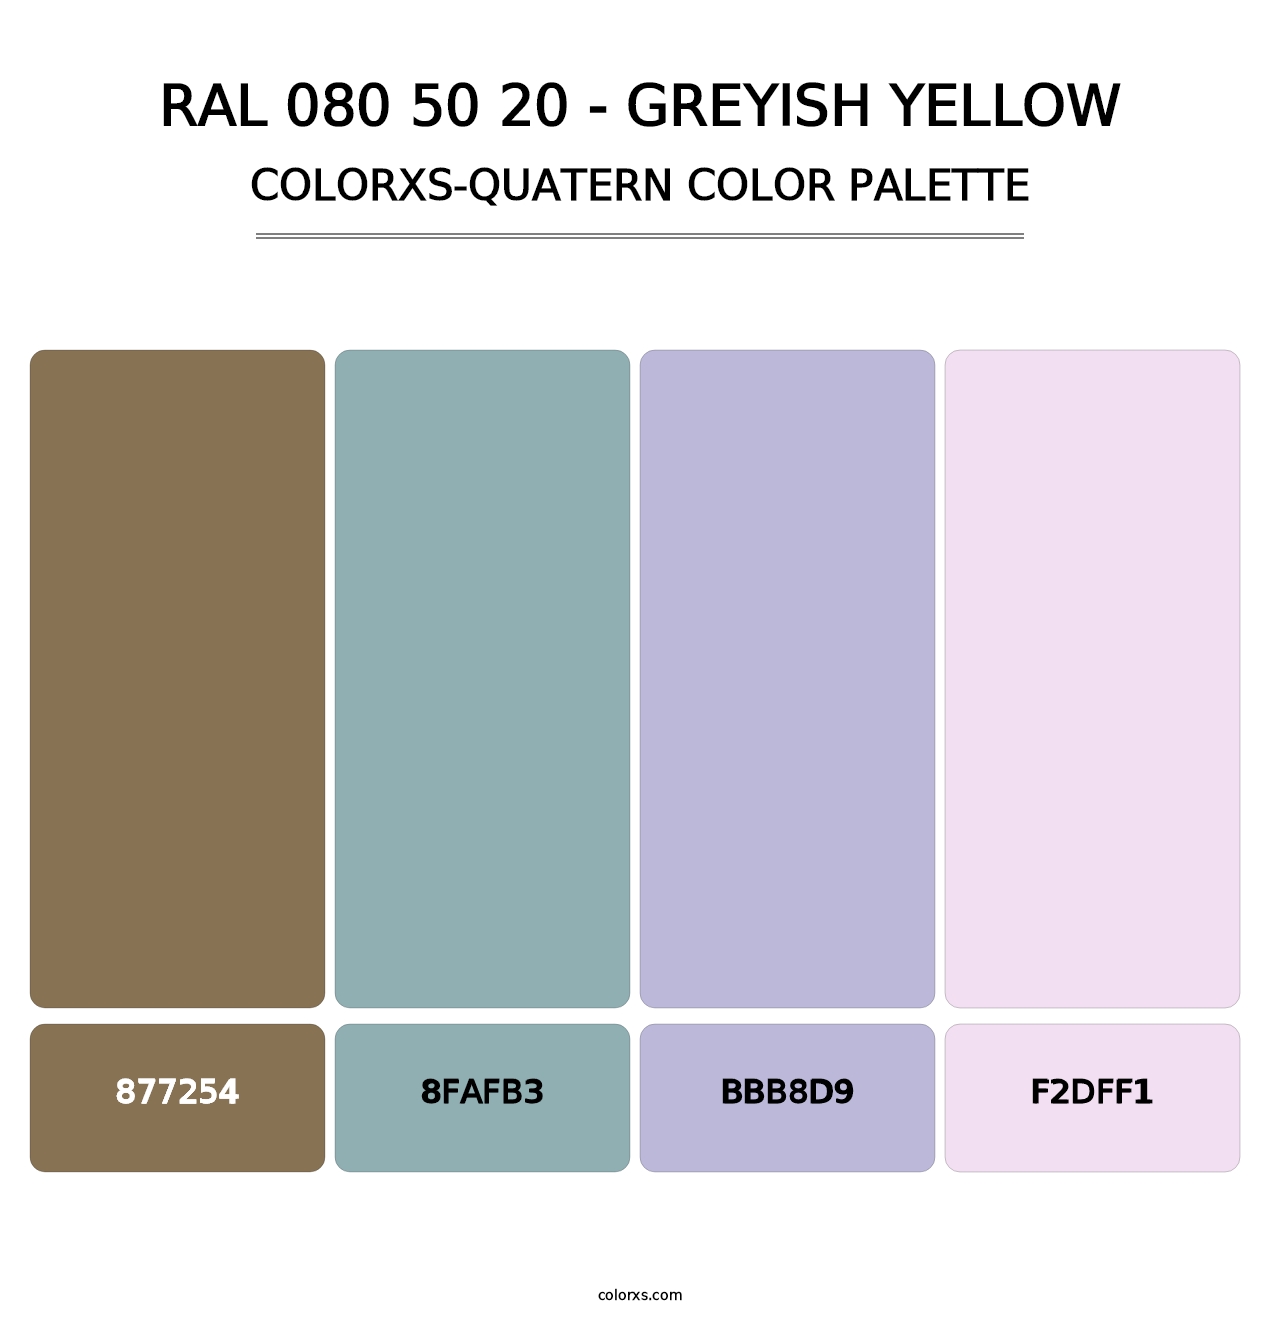 RAL 080 50 20 - Greyish Yellow - Colorxs Quatern Palette